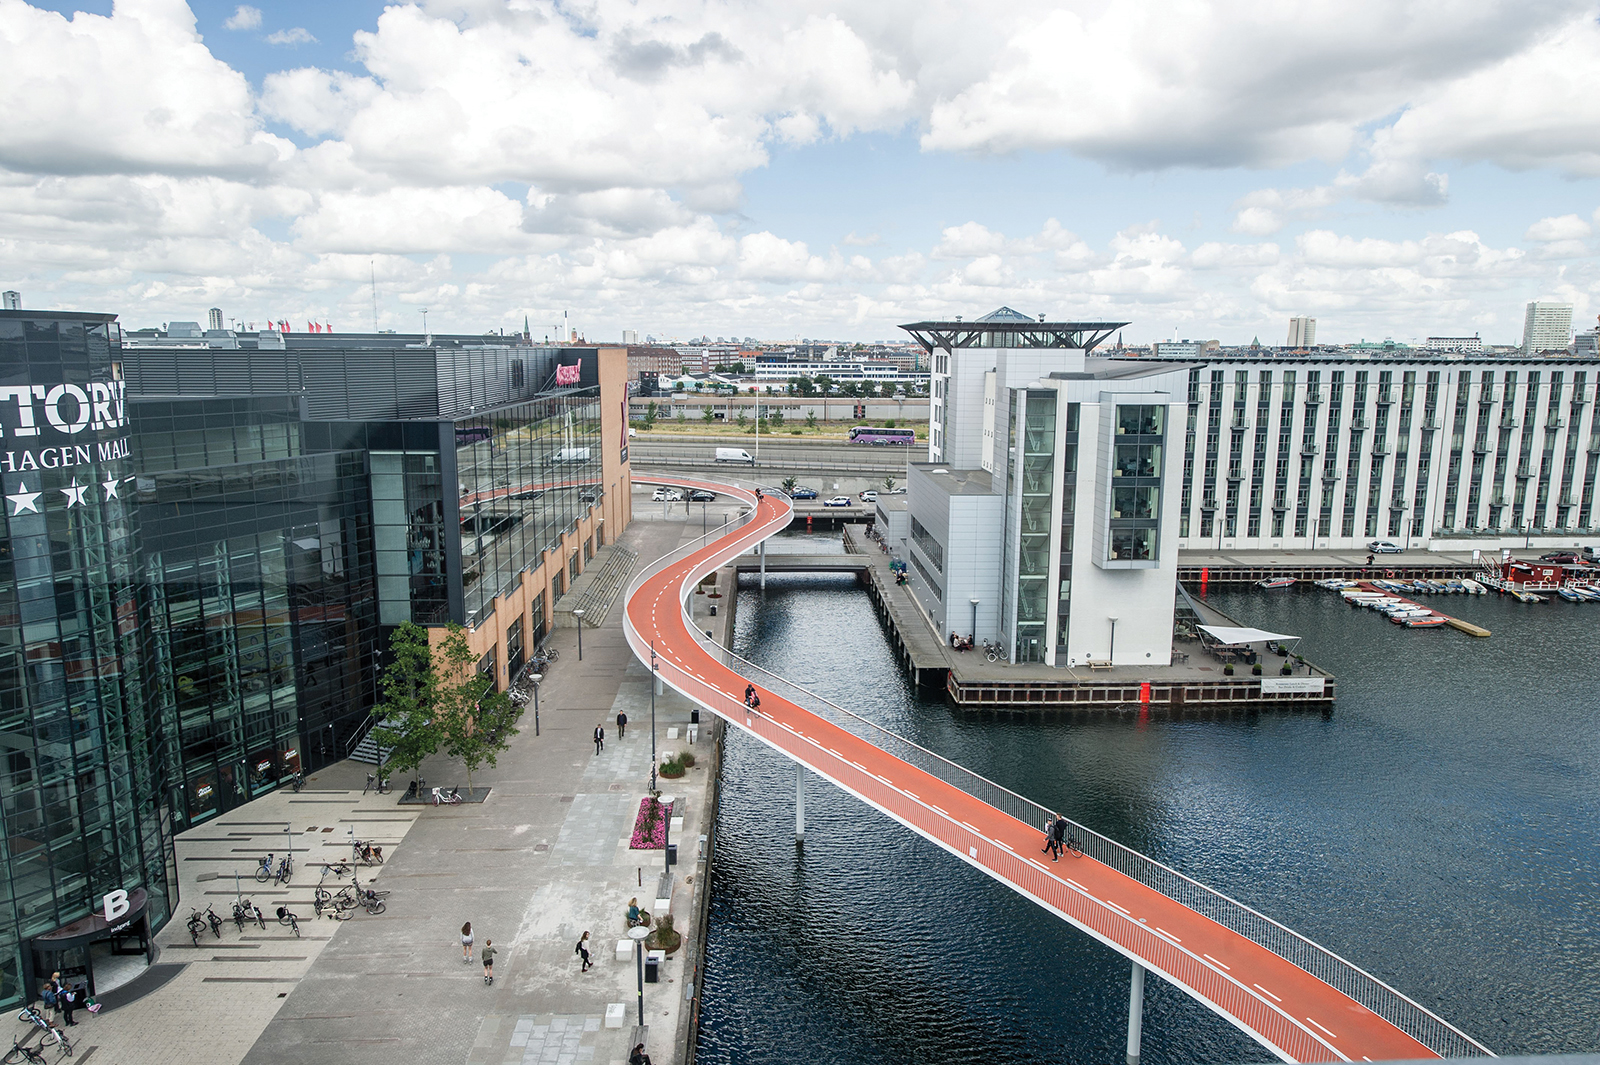 The Bicycle Snake in Copenhagen, Denmark transports cyclists across the harbour. Once down at ground level, the bridge connects with Bryggebroen, another bike bridge that enables cyclists to safely get from one side of the city to another.